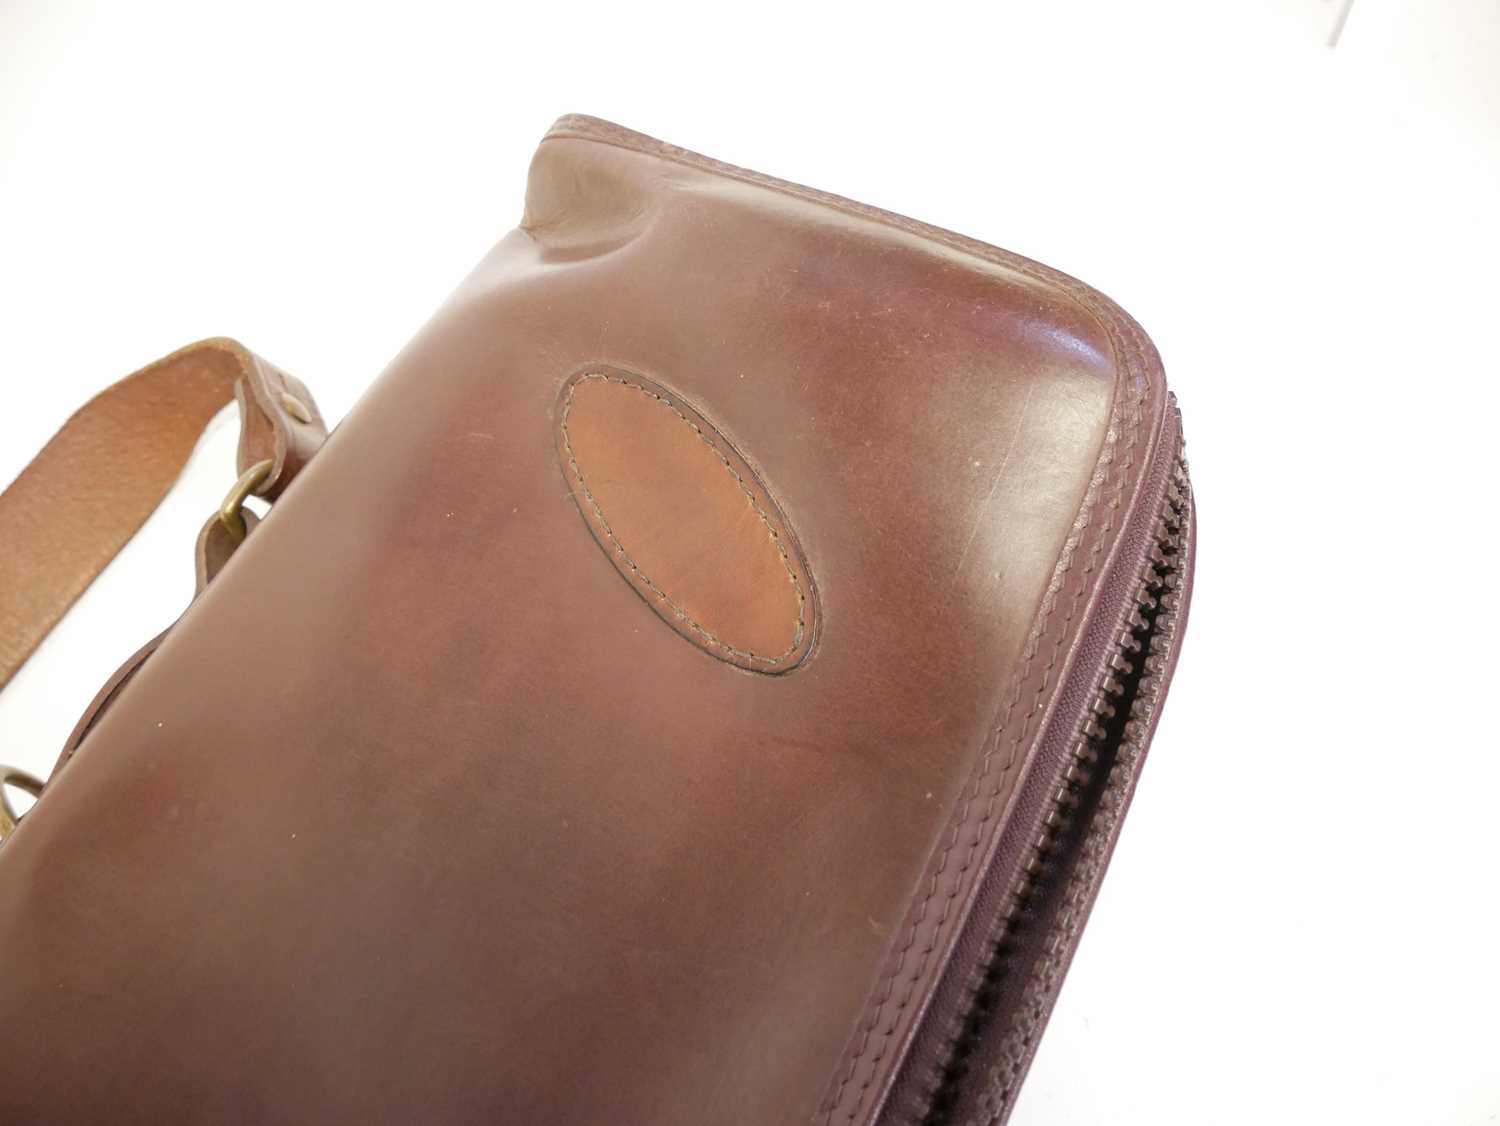 Good quality leather double gun slip 124cm overall length - Image 6 of 7